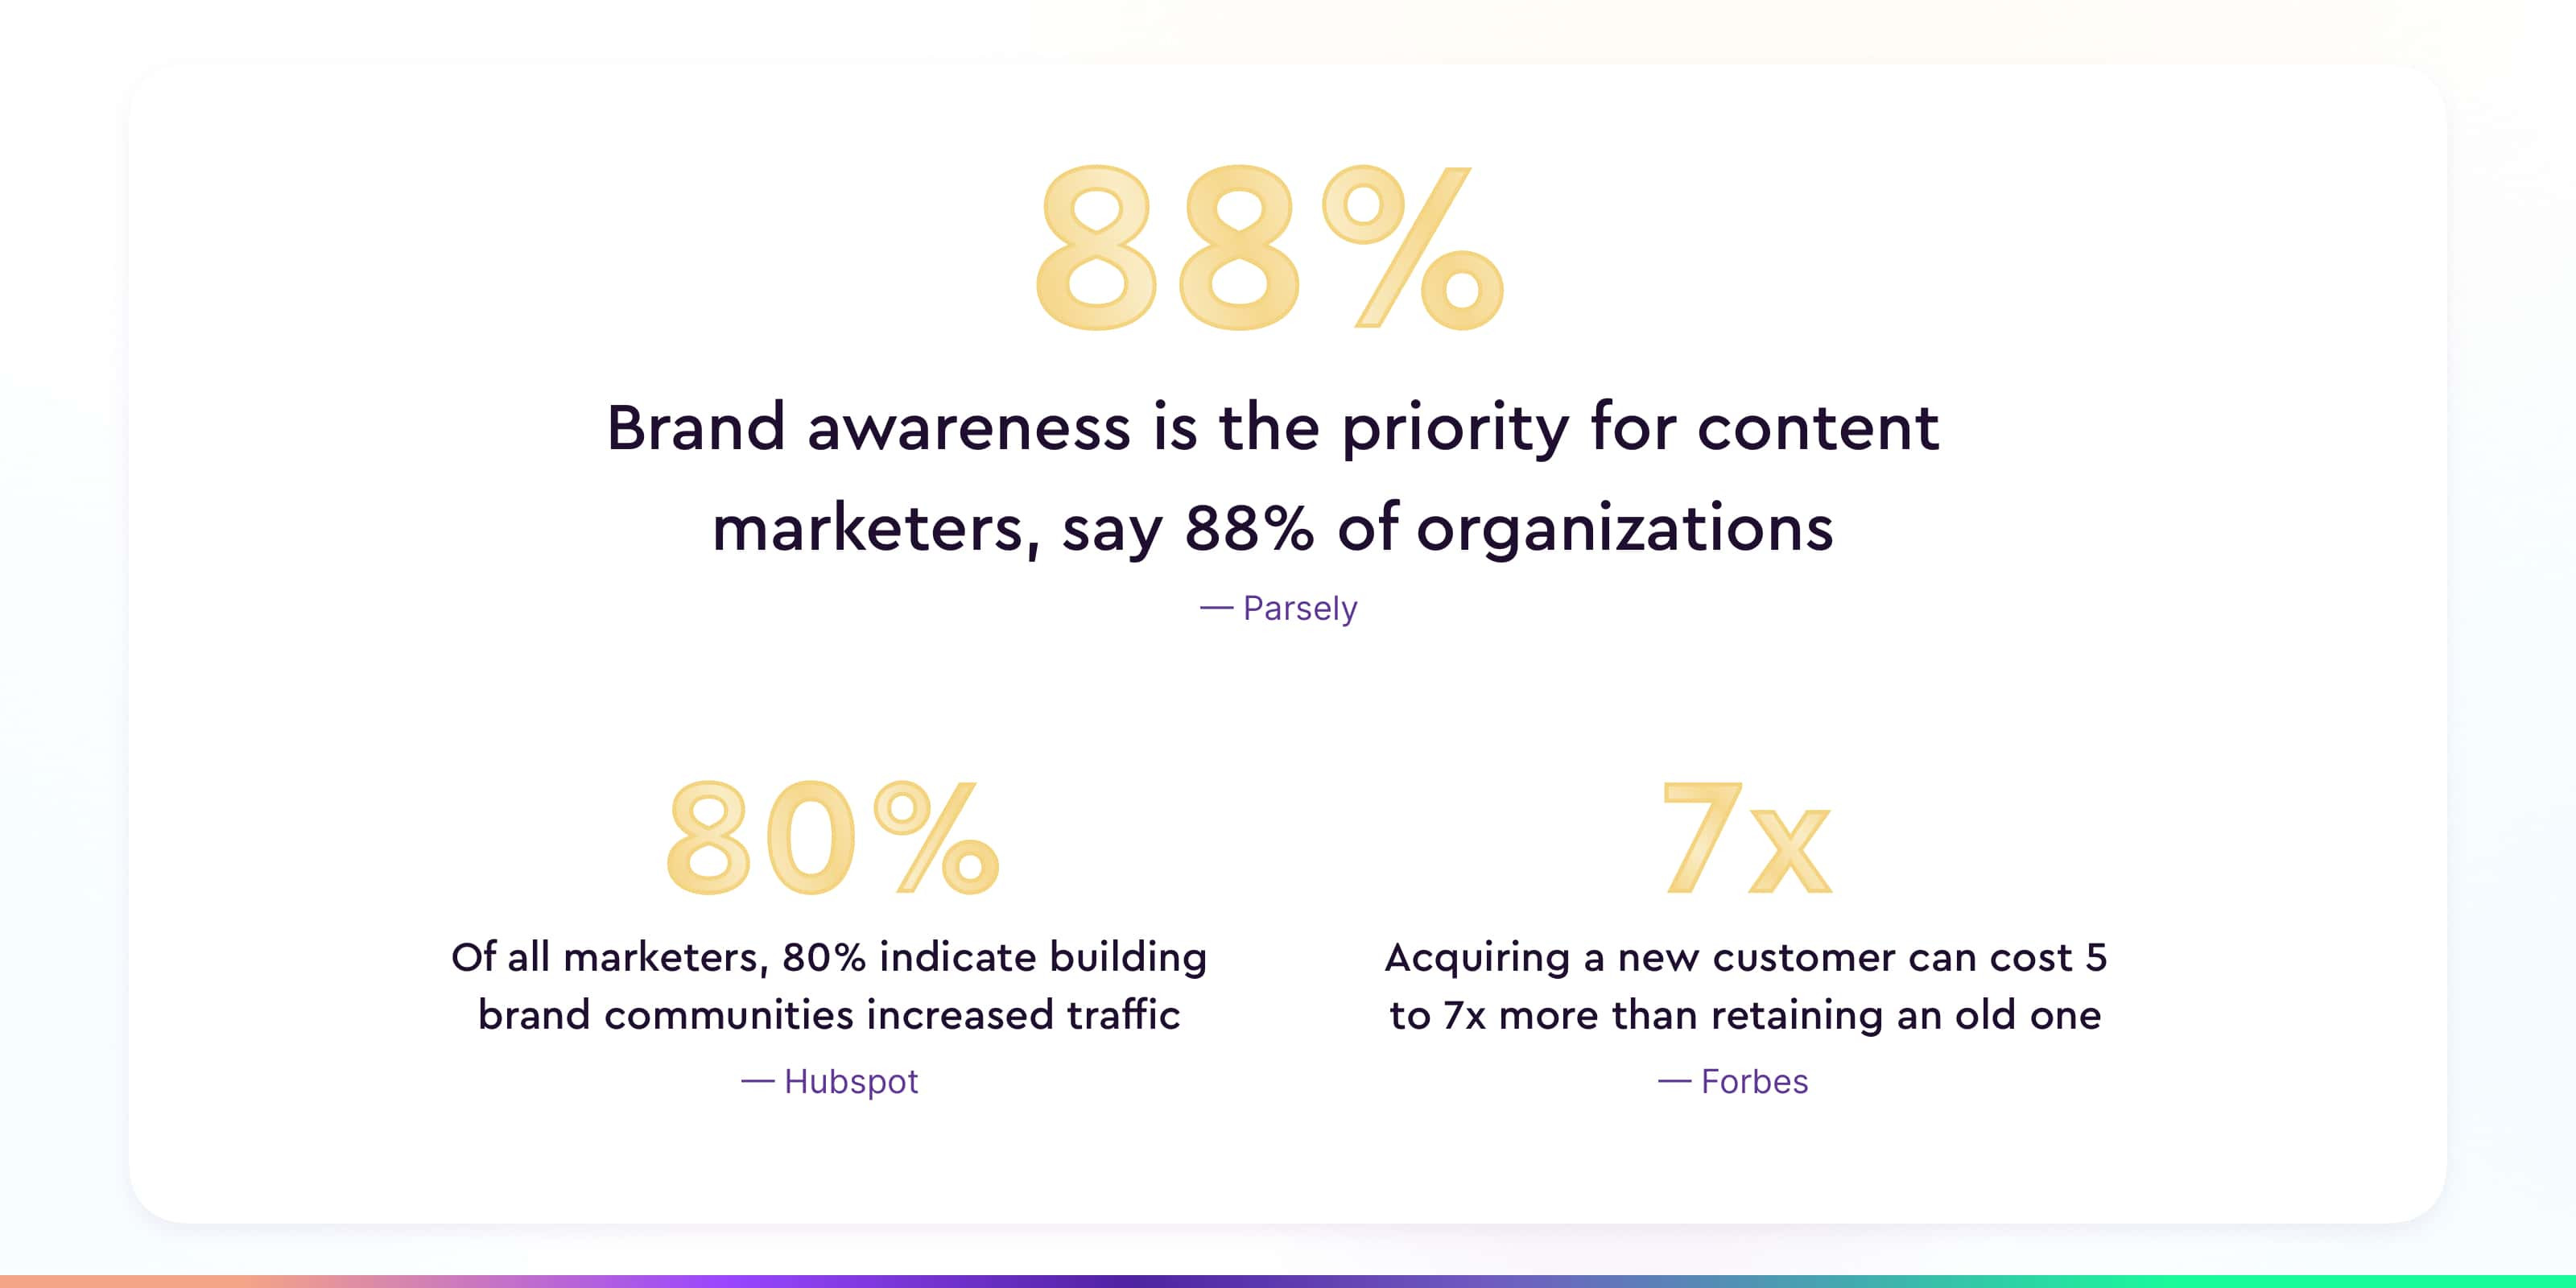 Research-driven arguments why content engagement can be improved by a shift in focus from marketers